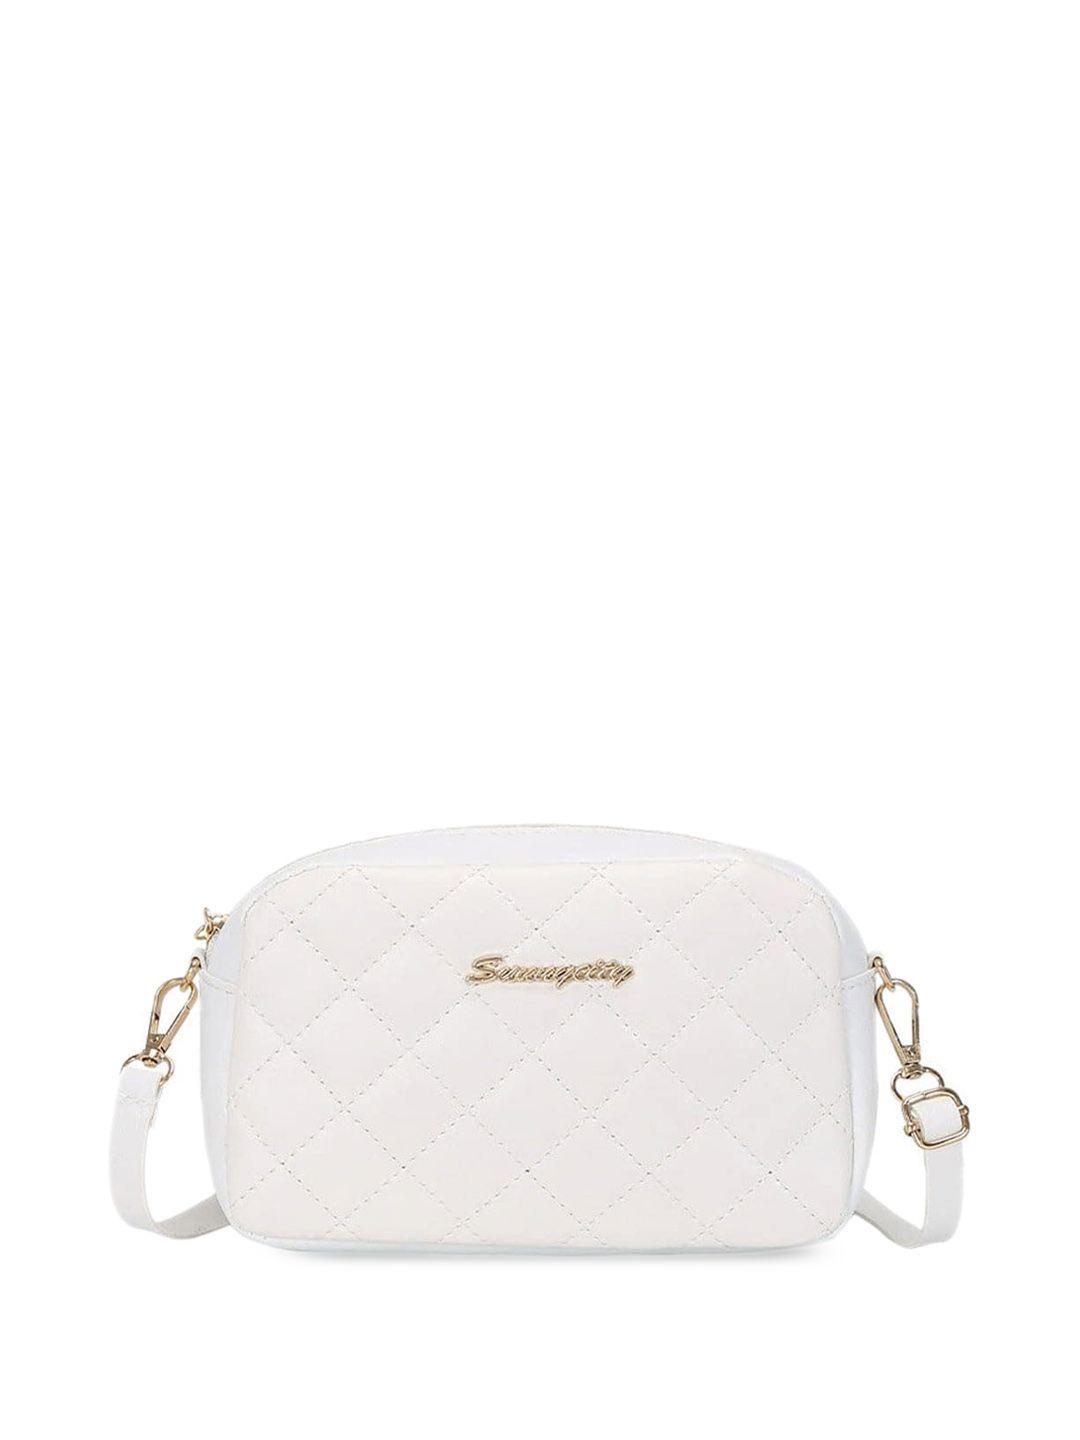 SYGA Geometric Textured Leather Structured Sling Bag with Quilted